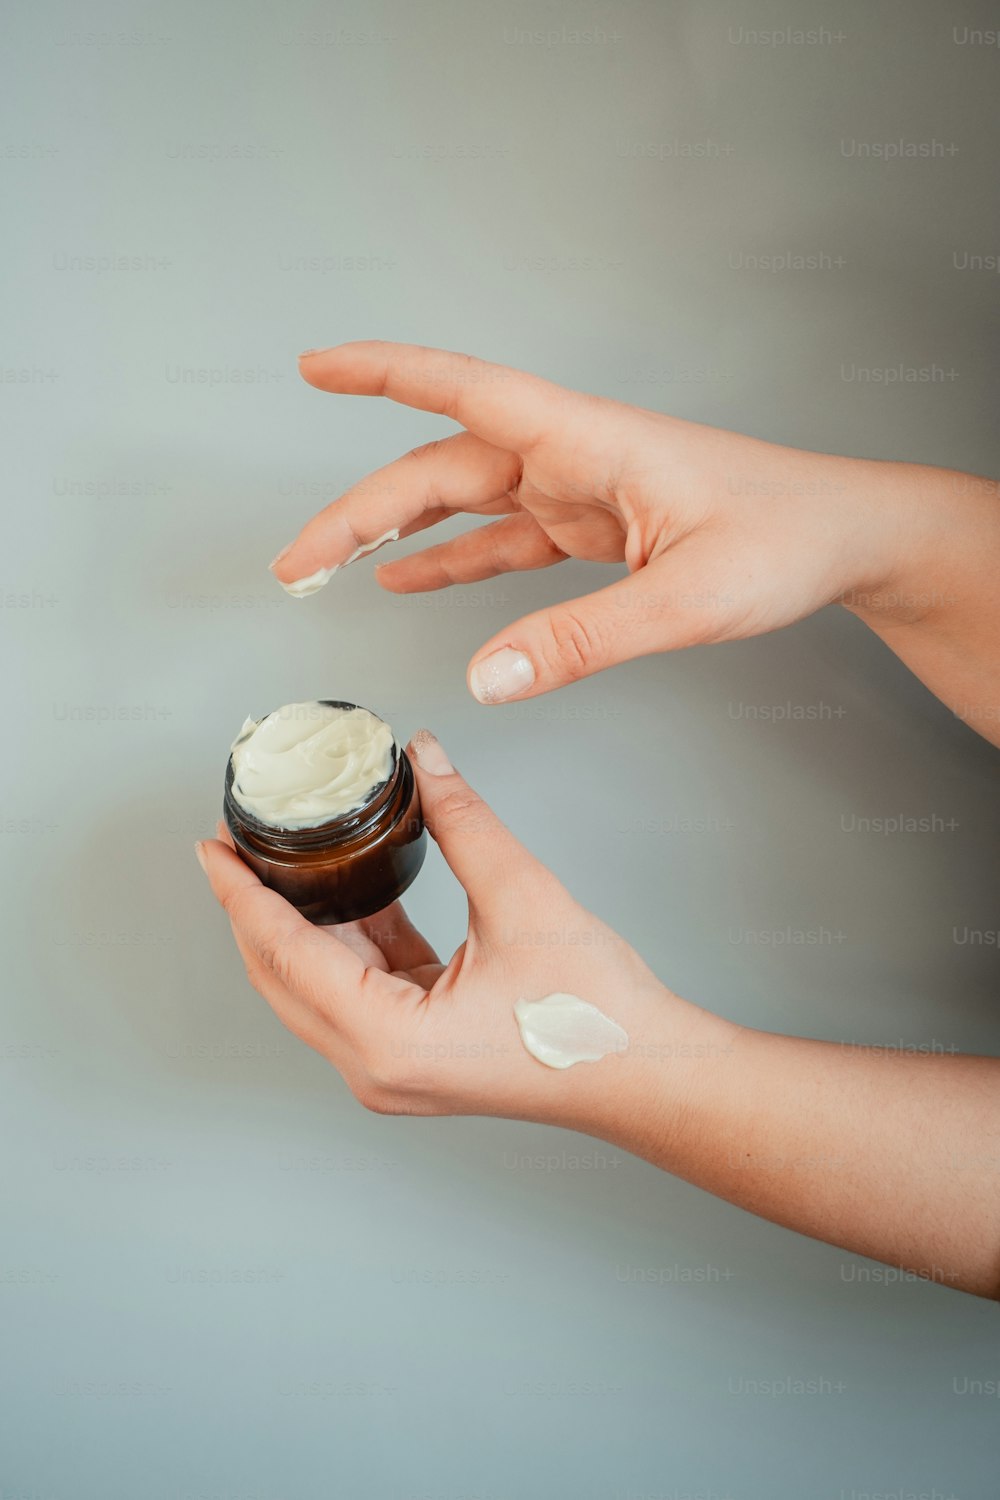 a person holding a jar of cream in their hand